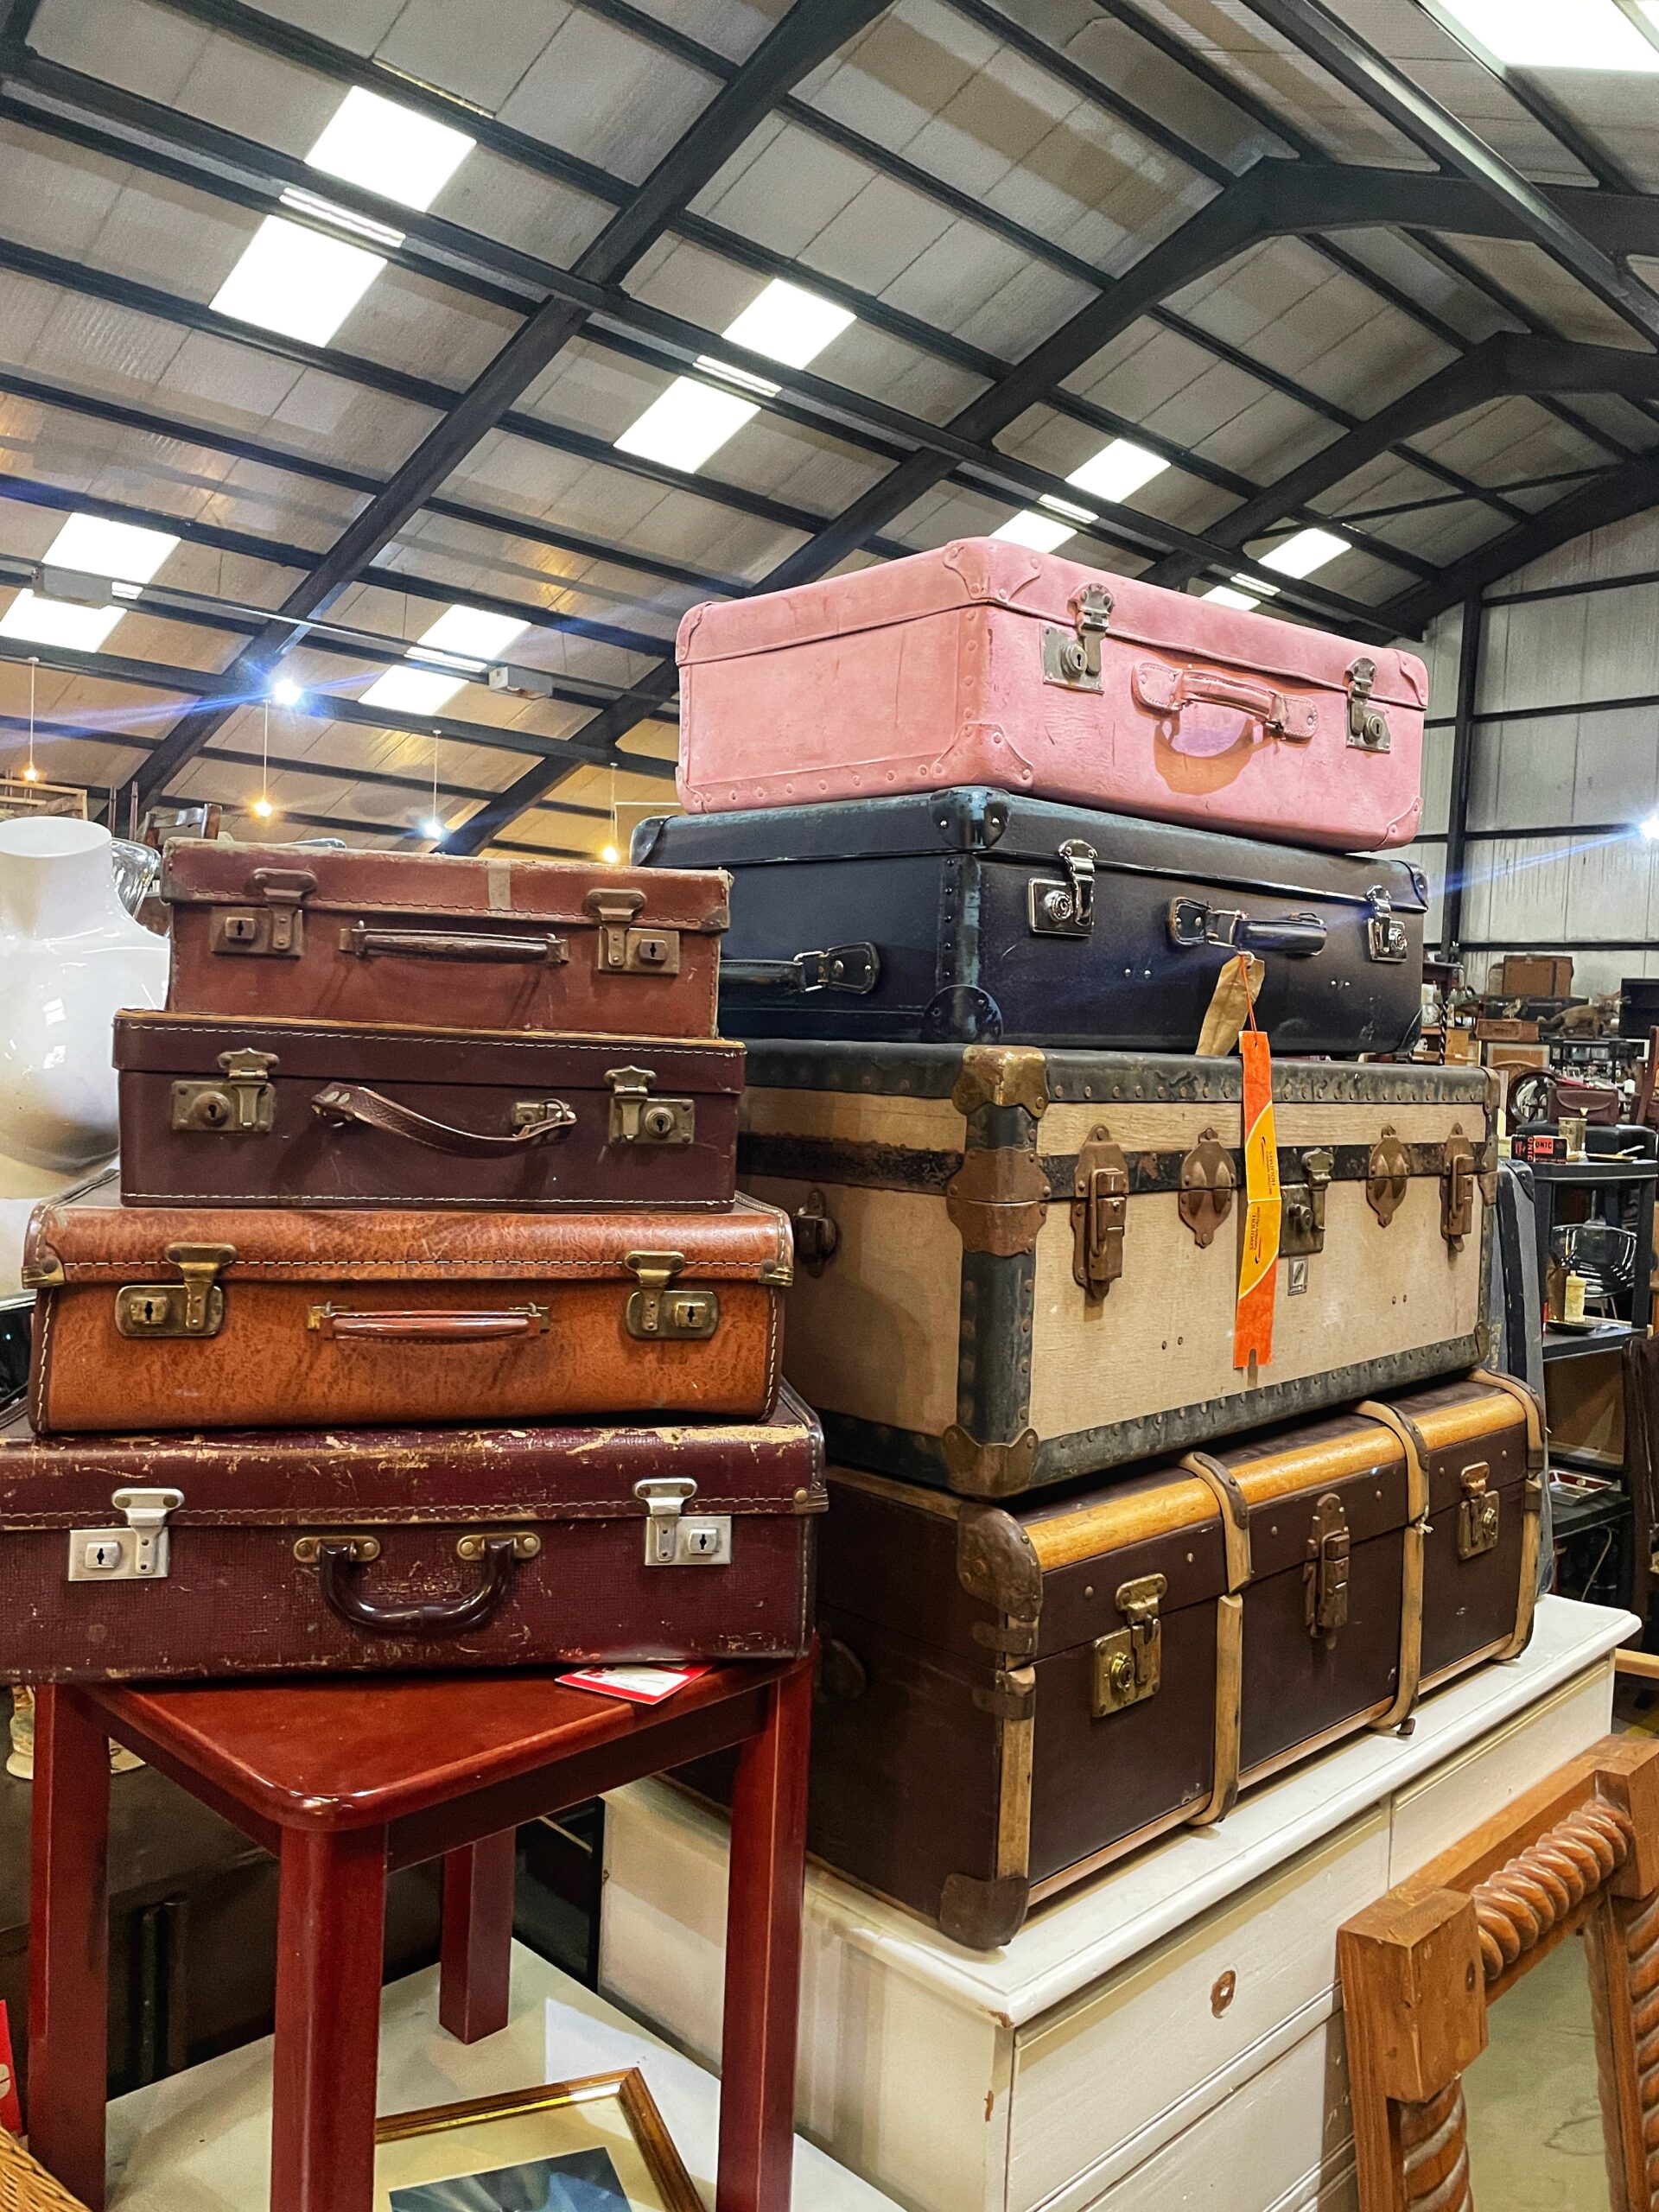 Stacks of antique trunks in Greater Manchester's antique quarter